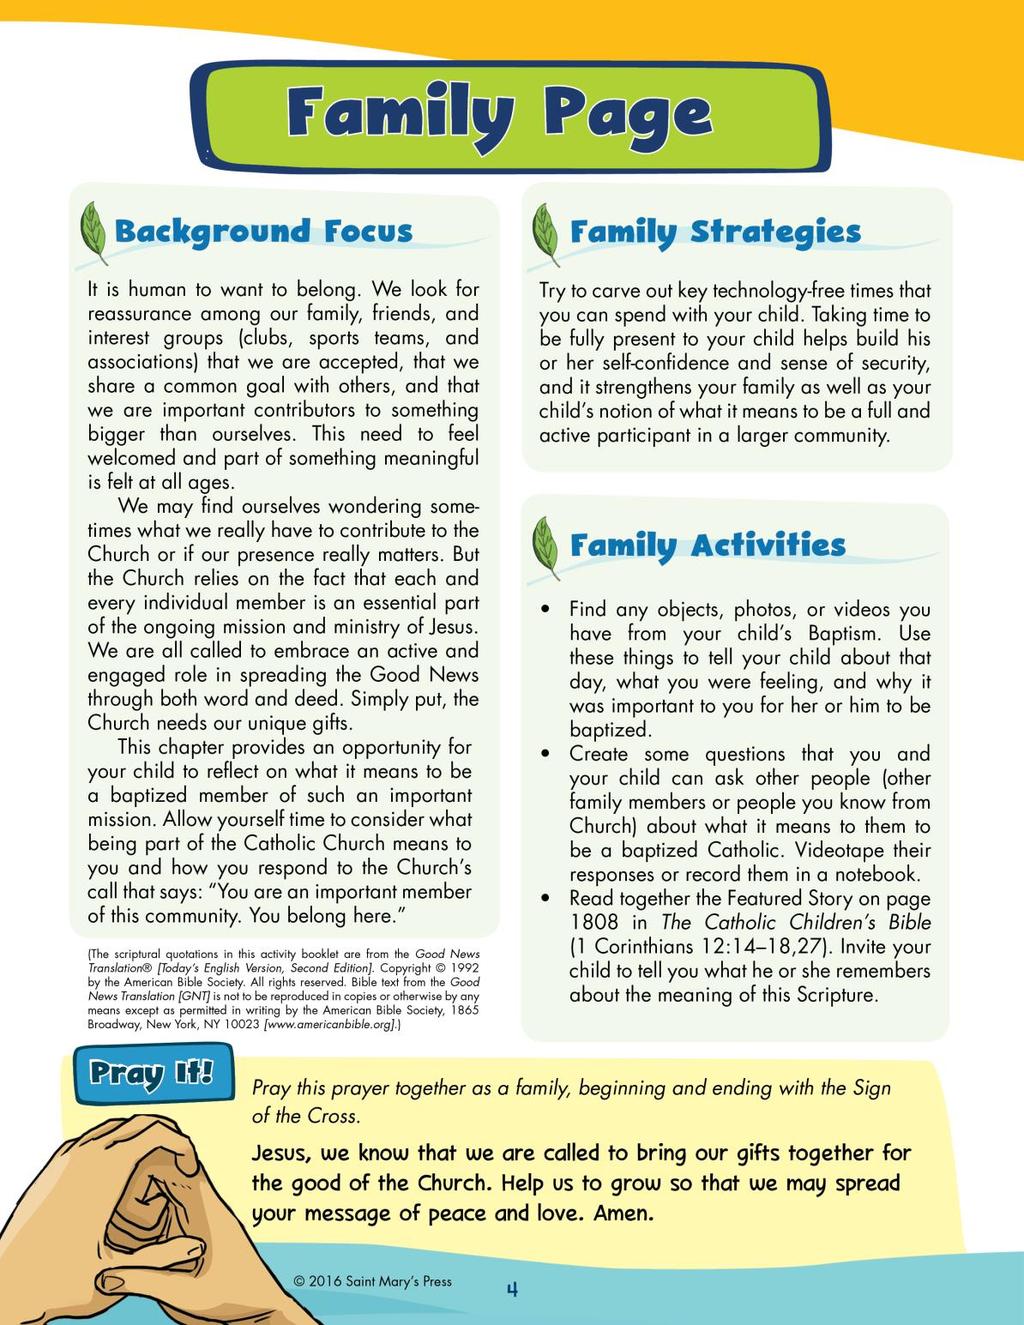 Program Overview The Family Page provides parents with helpful